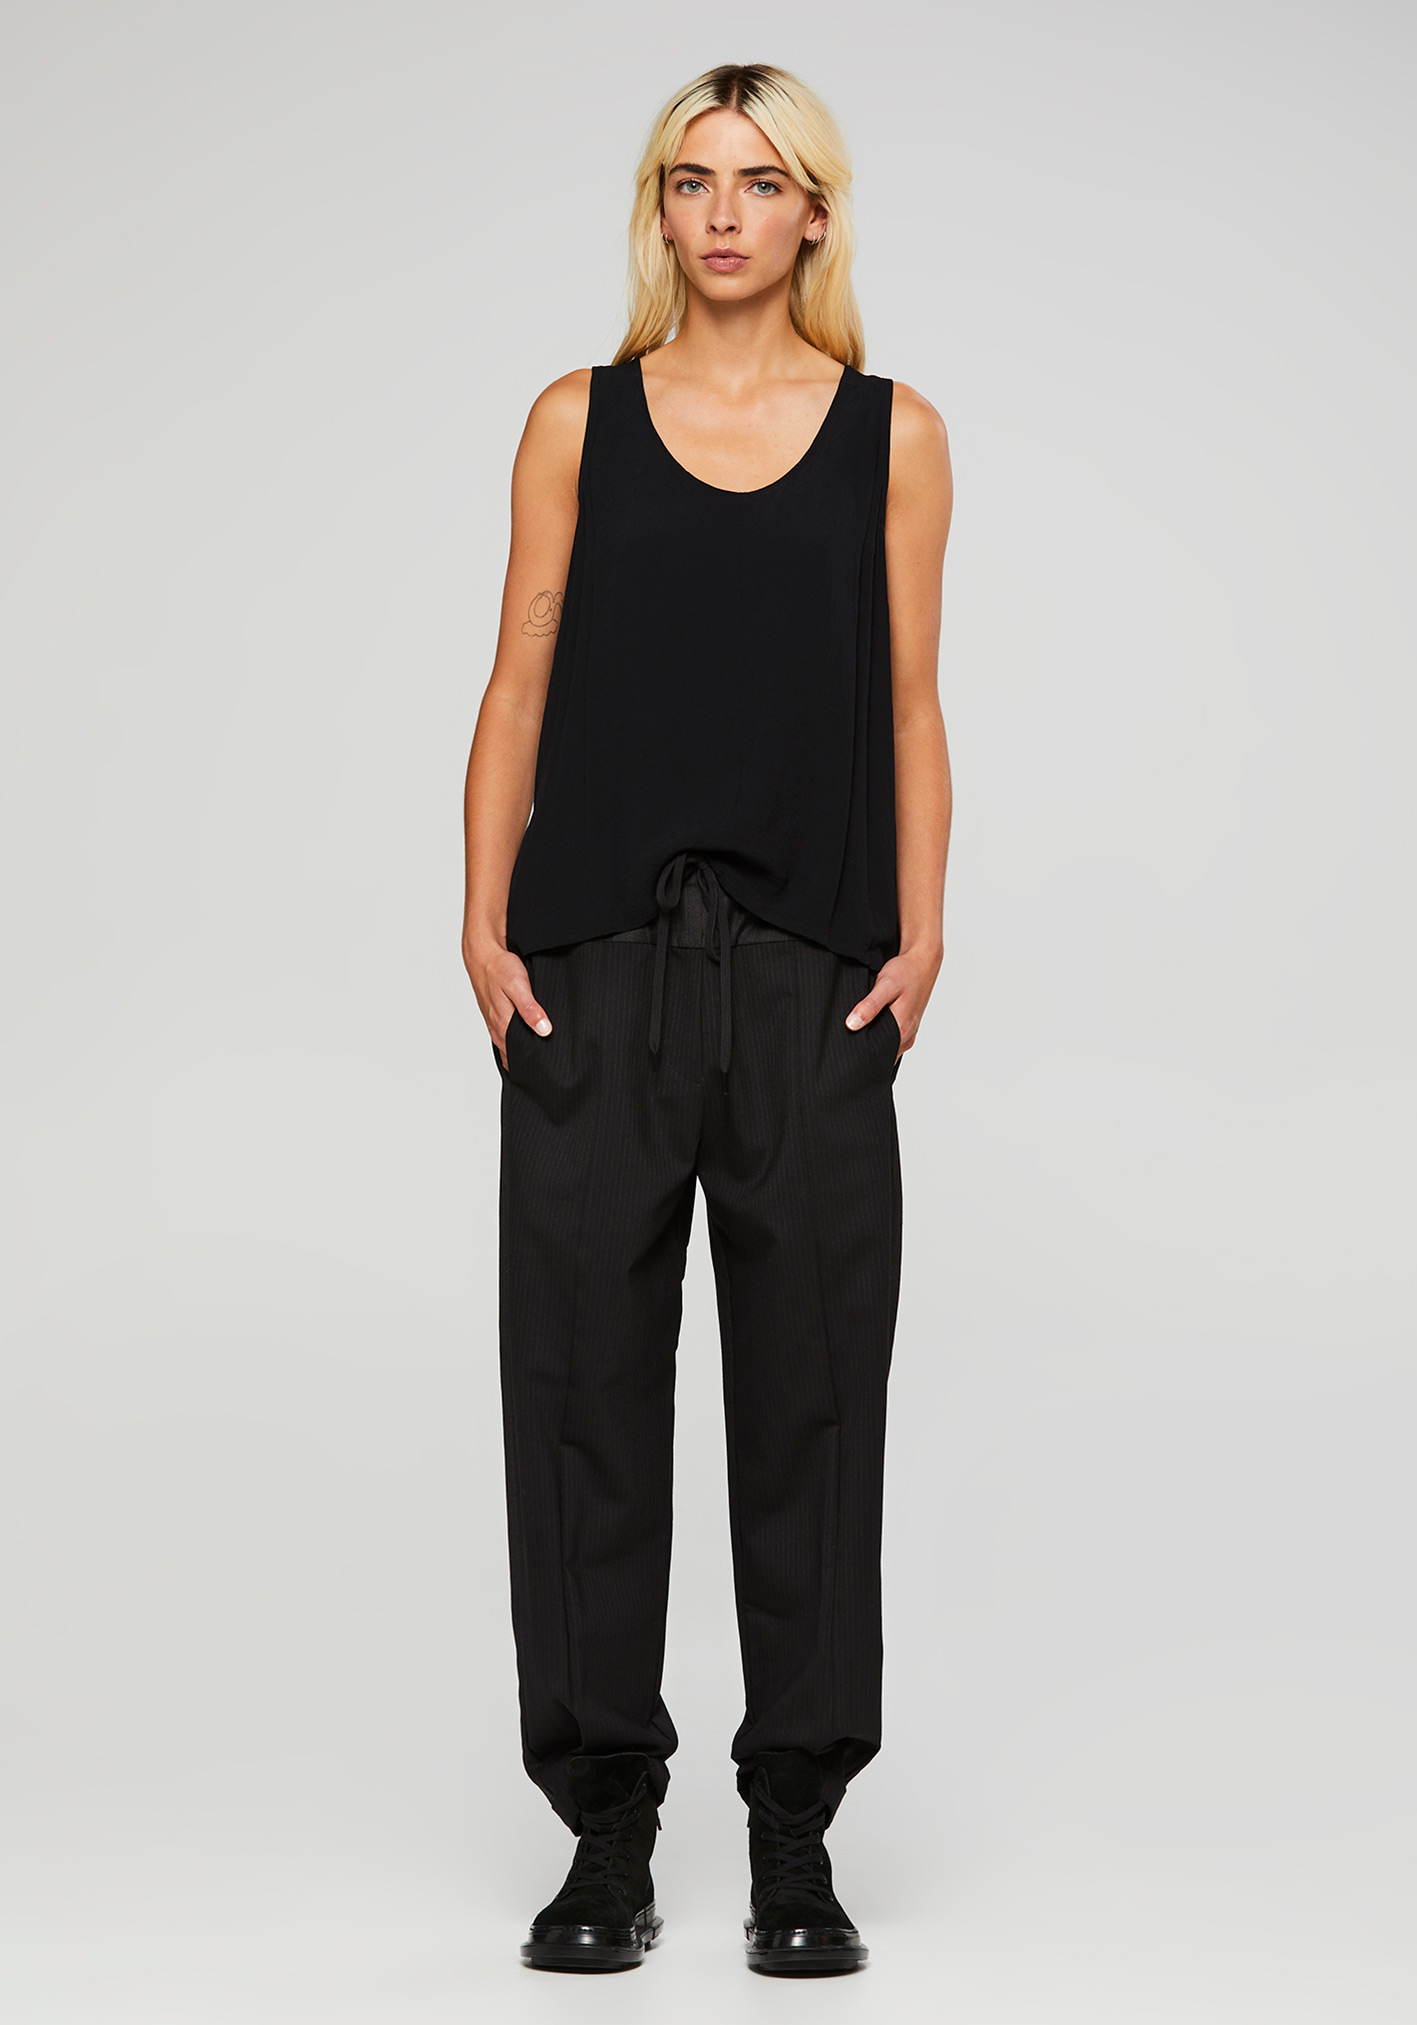 buy the latest Align Pant online